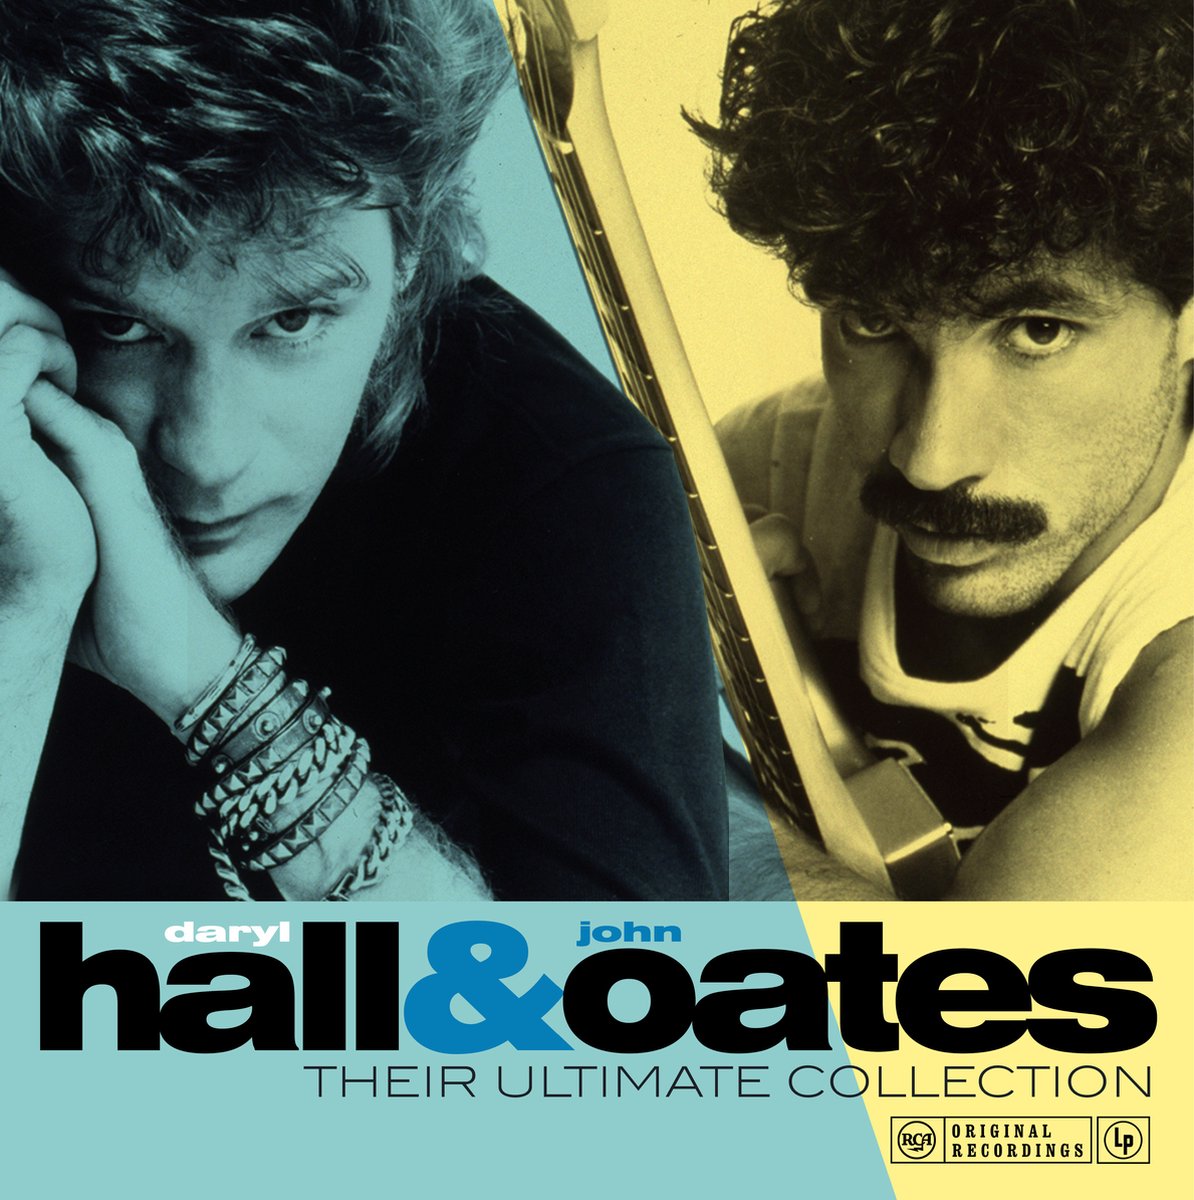  |  Vinyl LP | Daryl Hall & John Oates - Their Ultimate Collection (LP) | Records on Vinyl